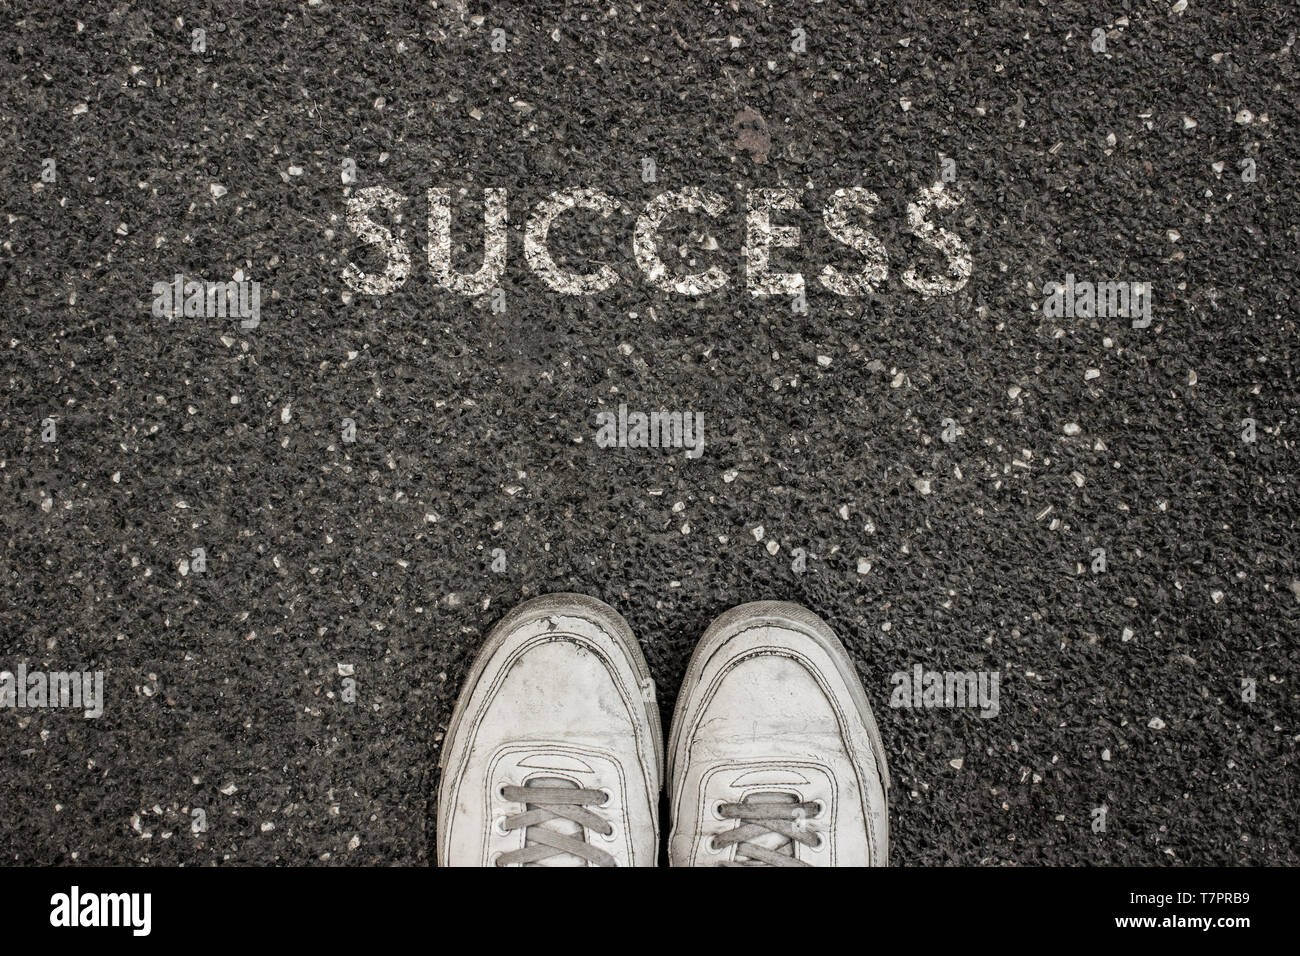 New life concept, Sport shoes and the word SUCCESS written on asphalt ground, Motivational slogan. Stock Photo